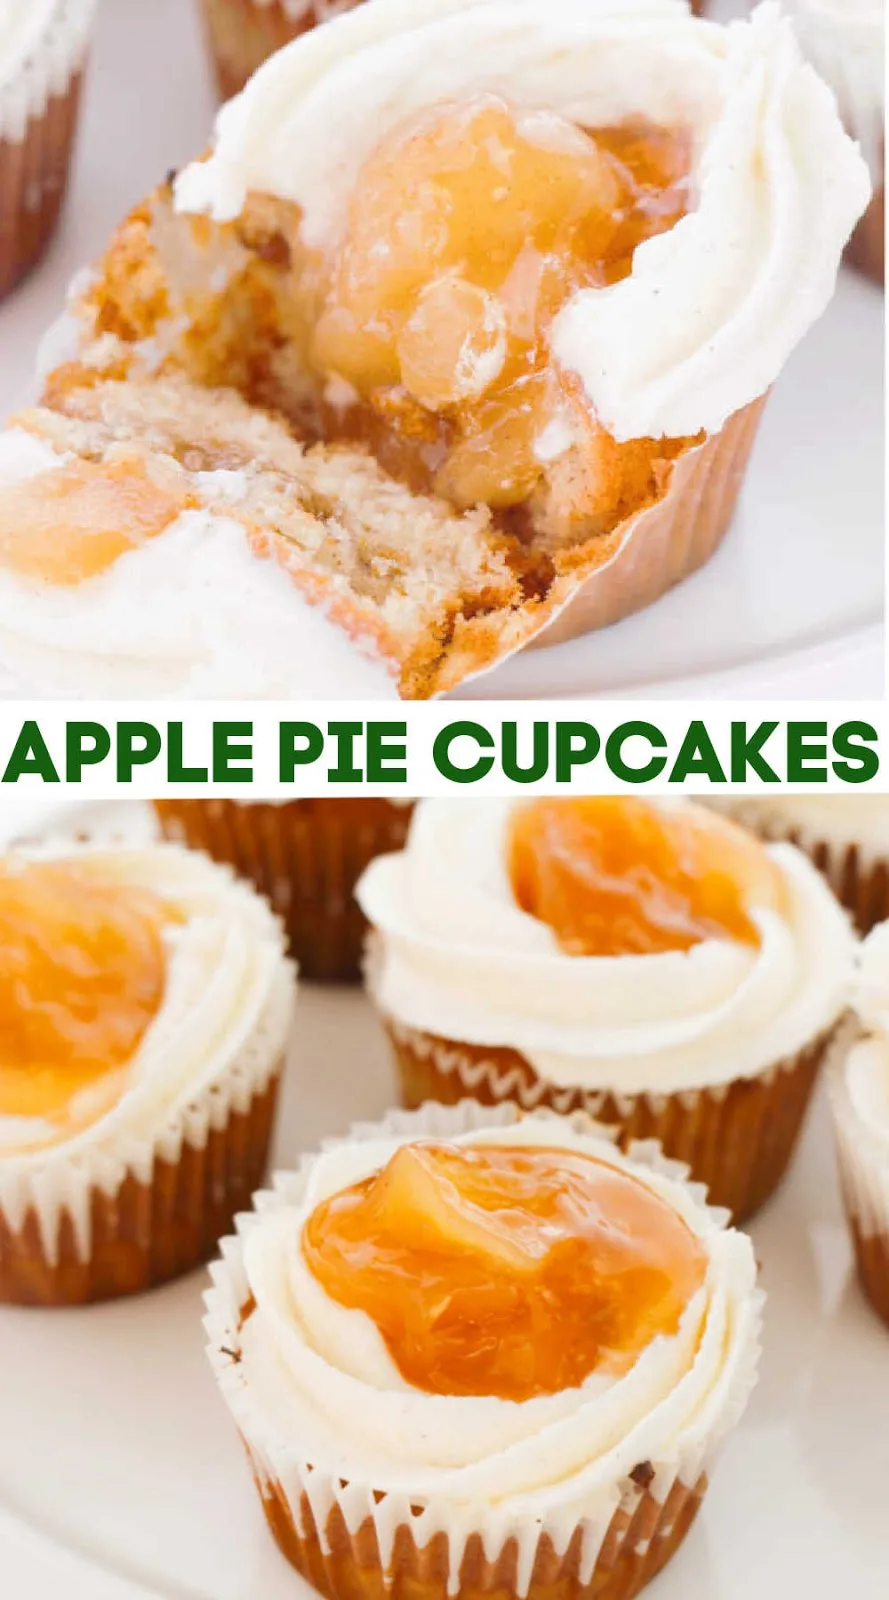 Start with perfect easy homemade vanilla cupcakes and bake some apple pie filling in the center. A ring of creamy vanilla buttercream holds more apples on top. These cupcakes are the perfect cakey version of apple pie a la mode. Make a batch to see for yourself!